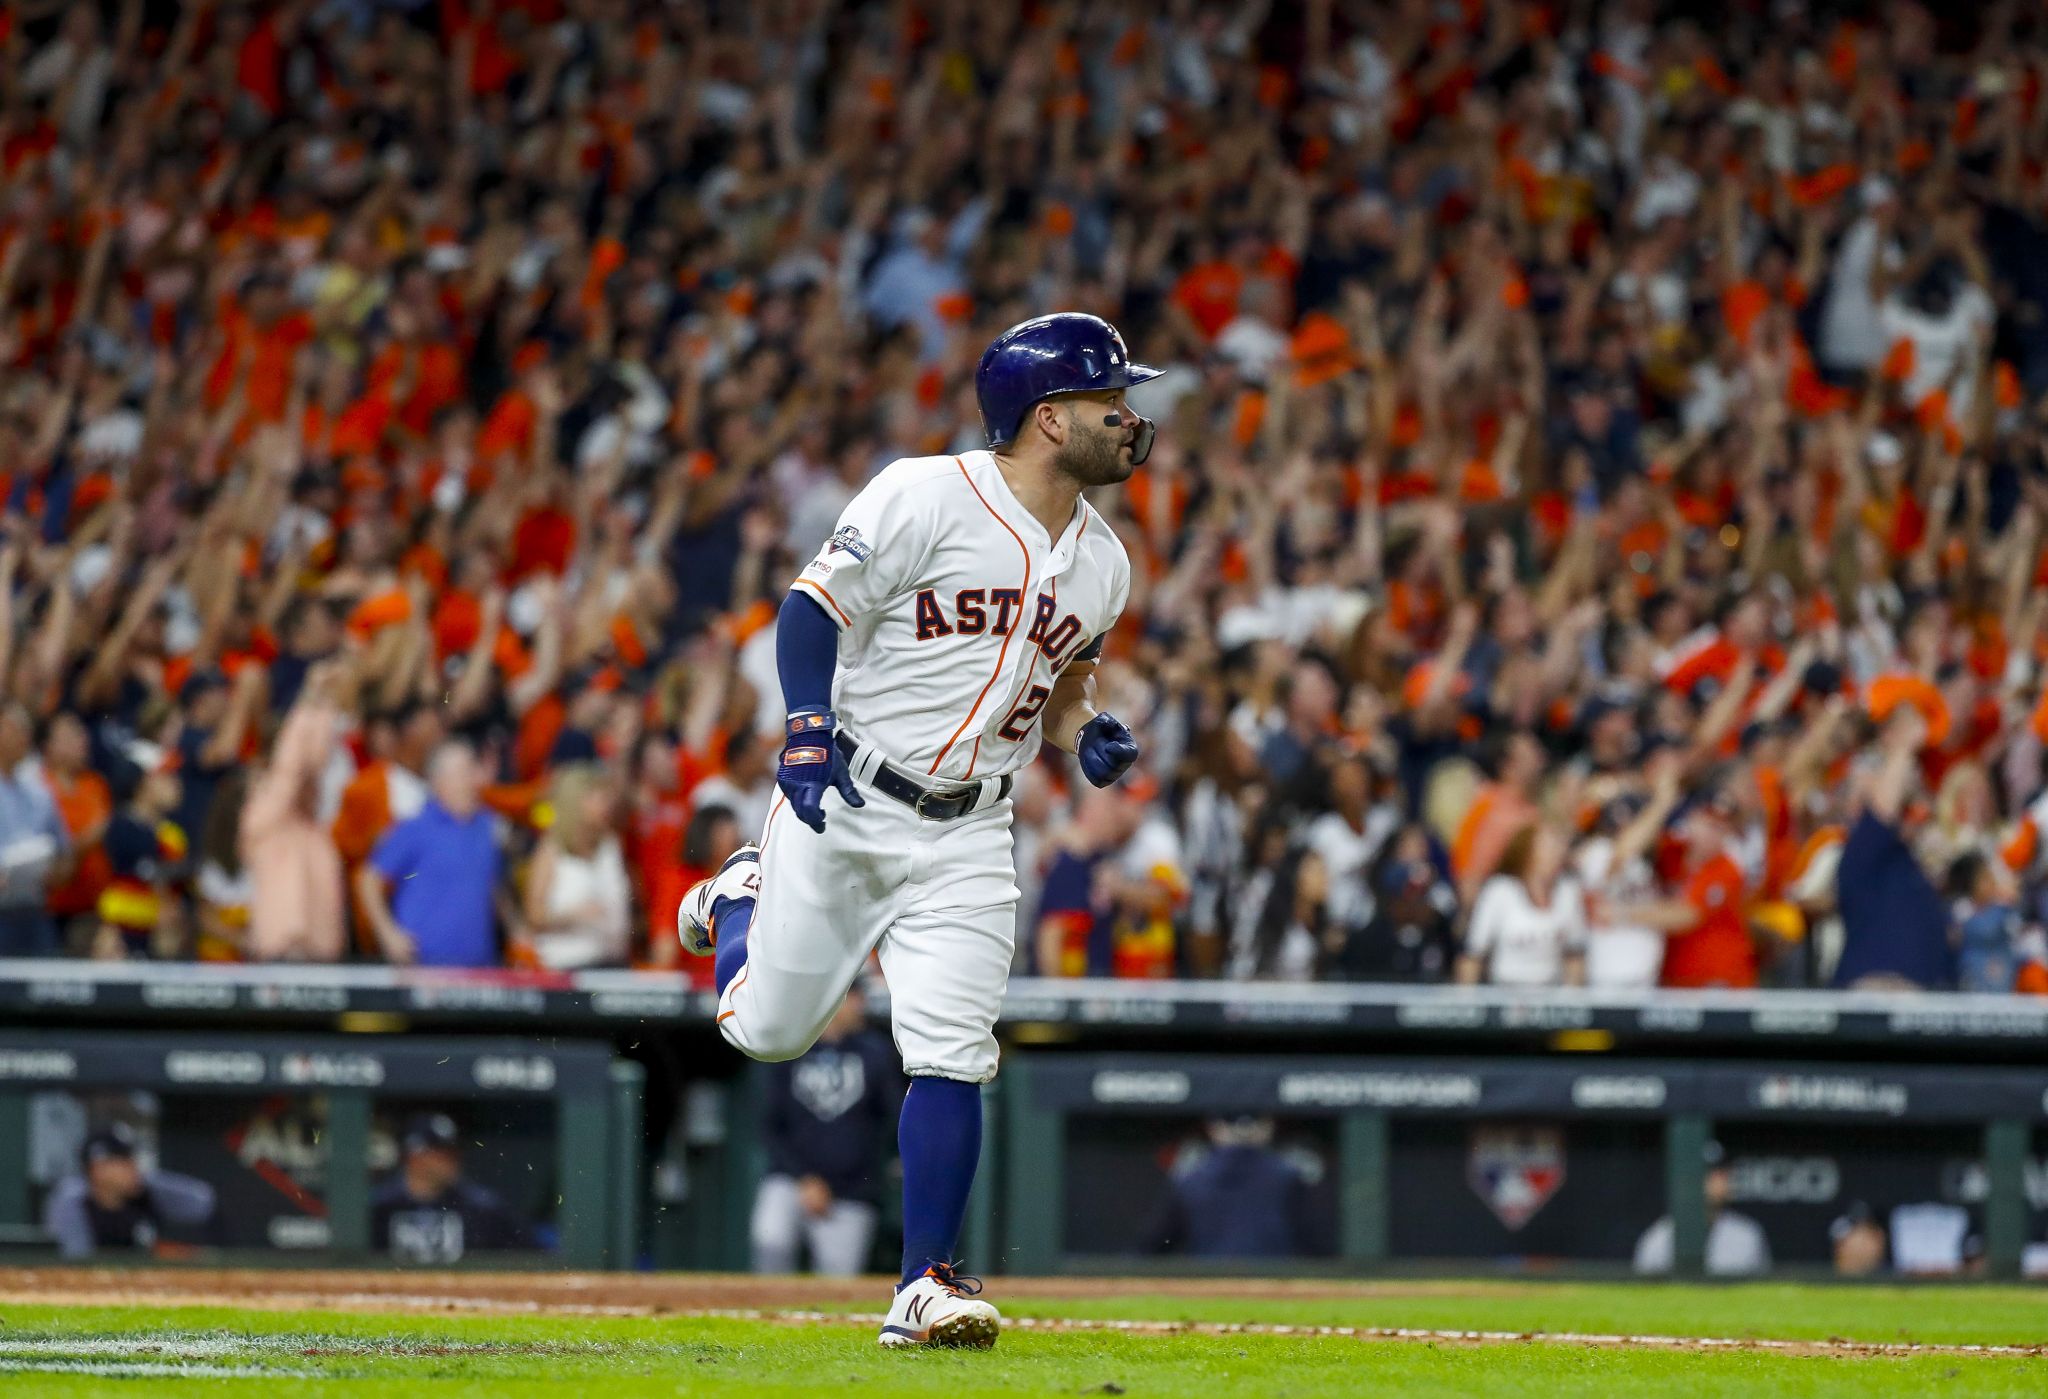 Houston Astros finalize 2019 World Series roster